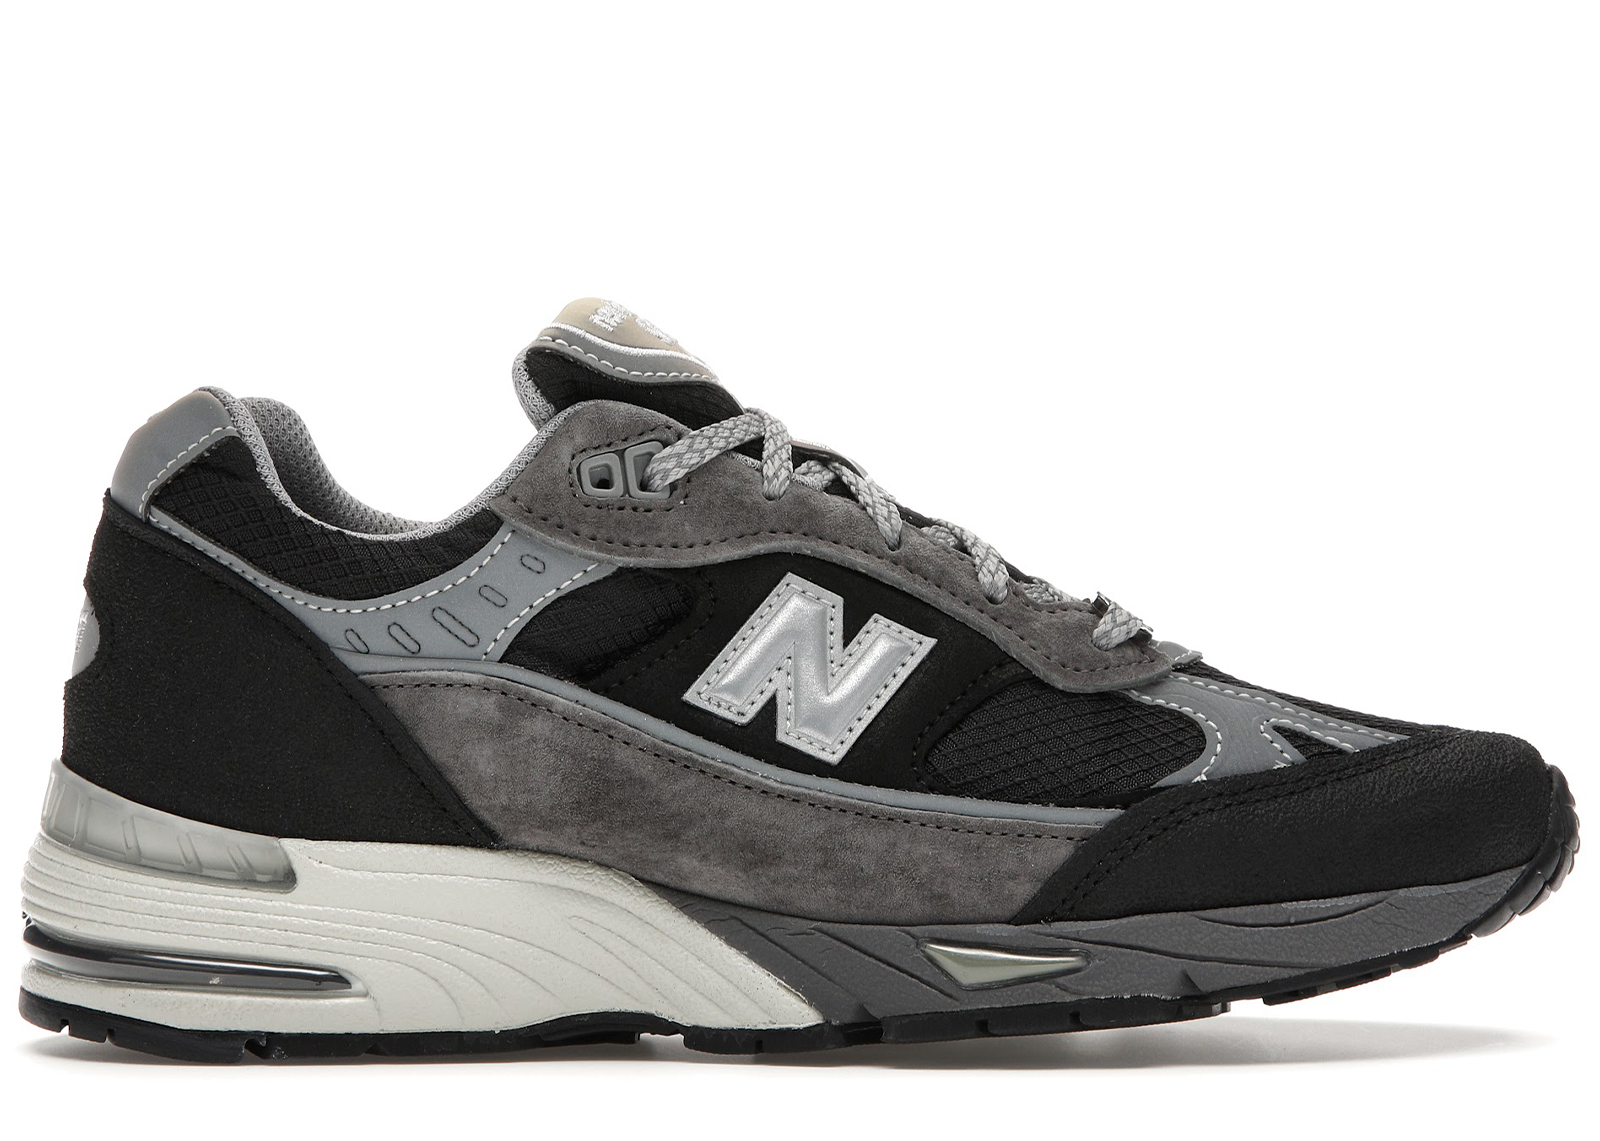 Buy New Balance 991 Shoes & New Sneakers - StockX